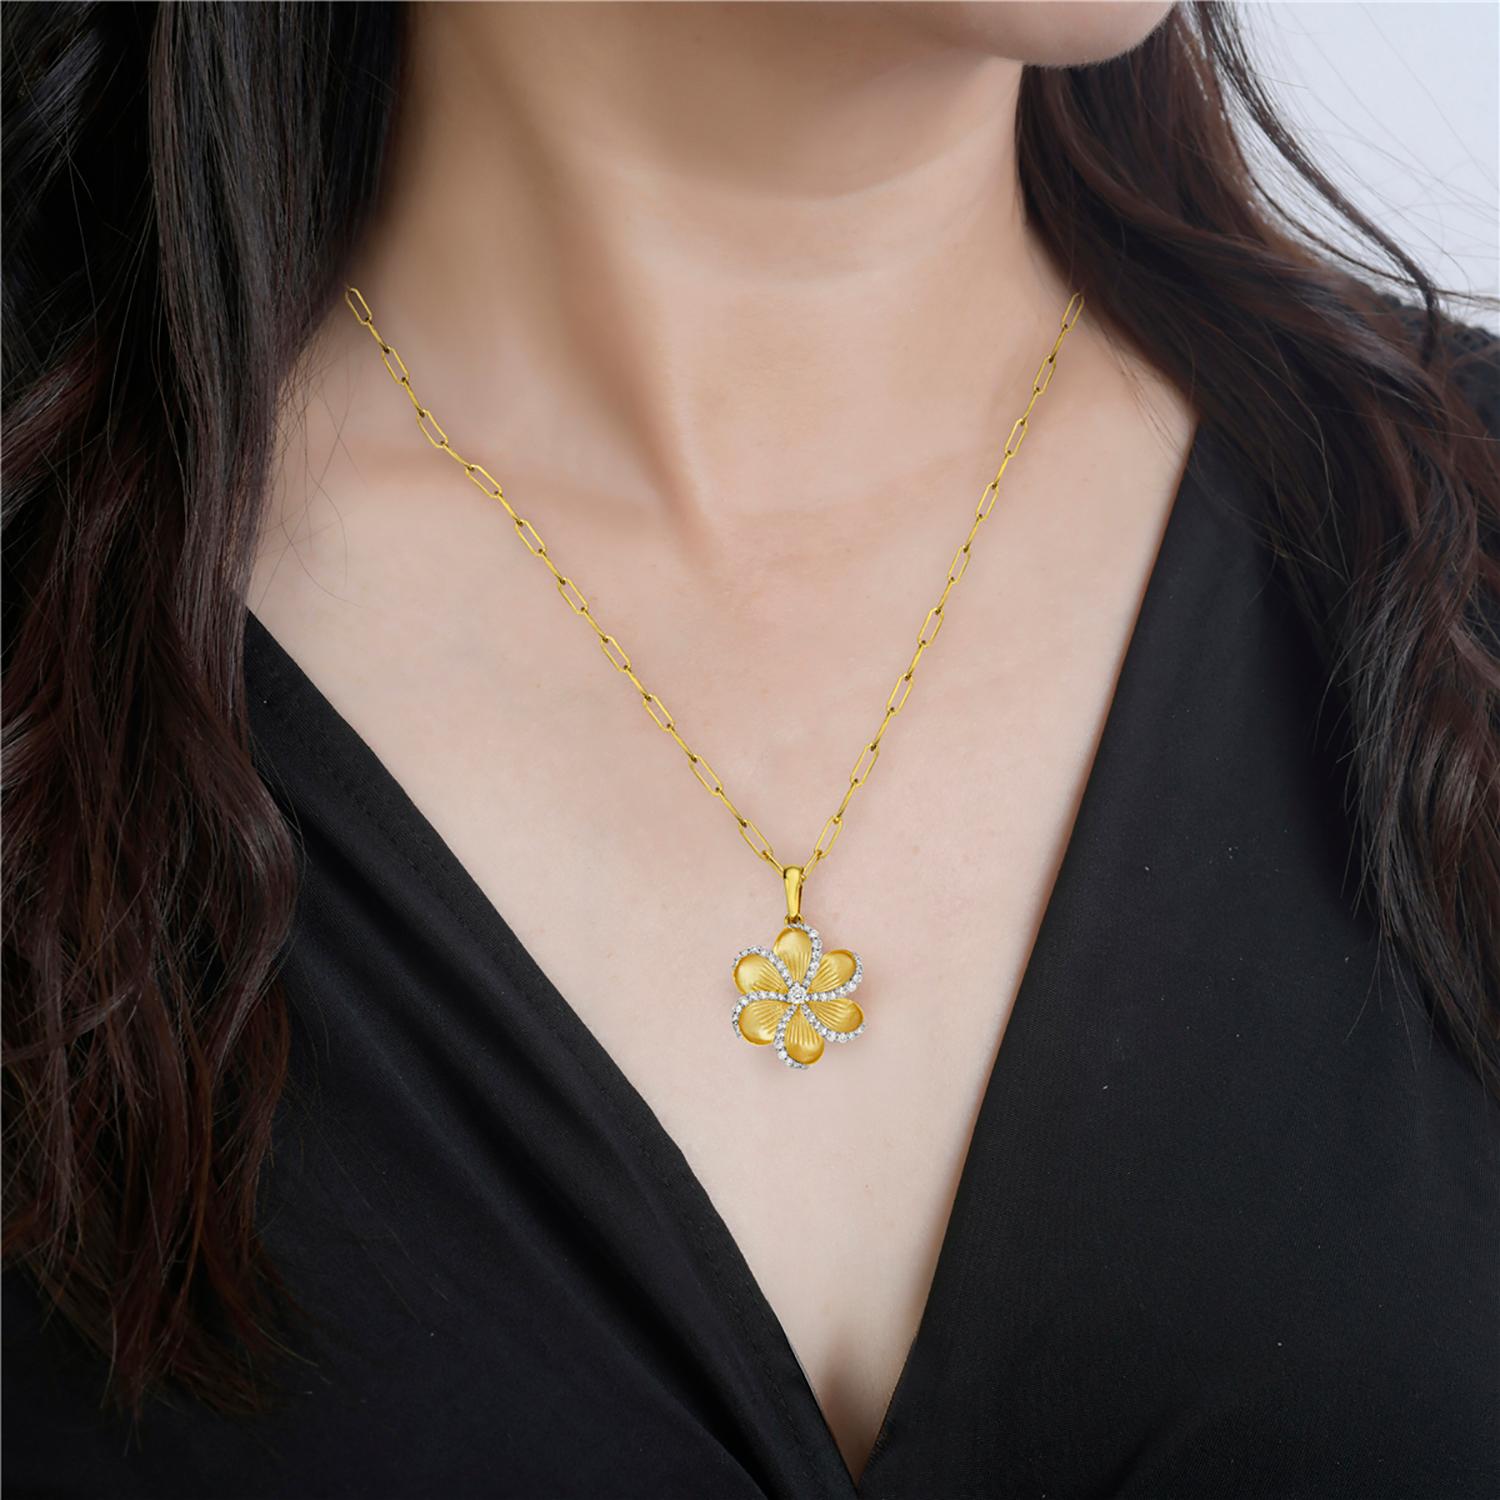 This stunning pendant features a meticulously carved flower design that exudes natural beauty and grace. The pendant is further accentuated with a sparkling halo of pave-set diamonds that surround the edges, adding a touch of luxury and glamour.